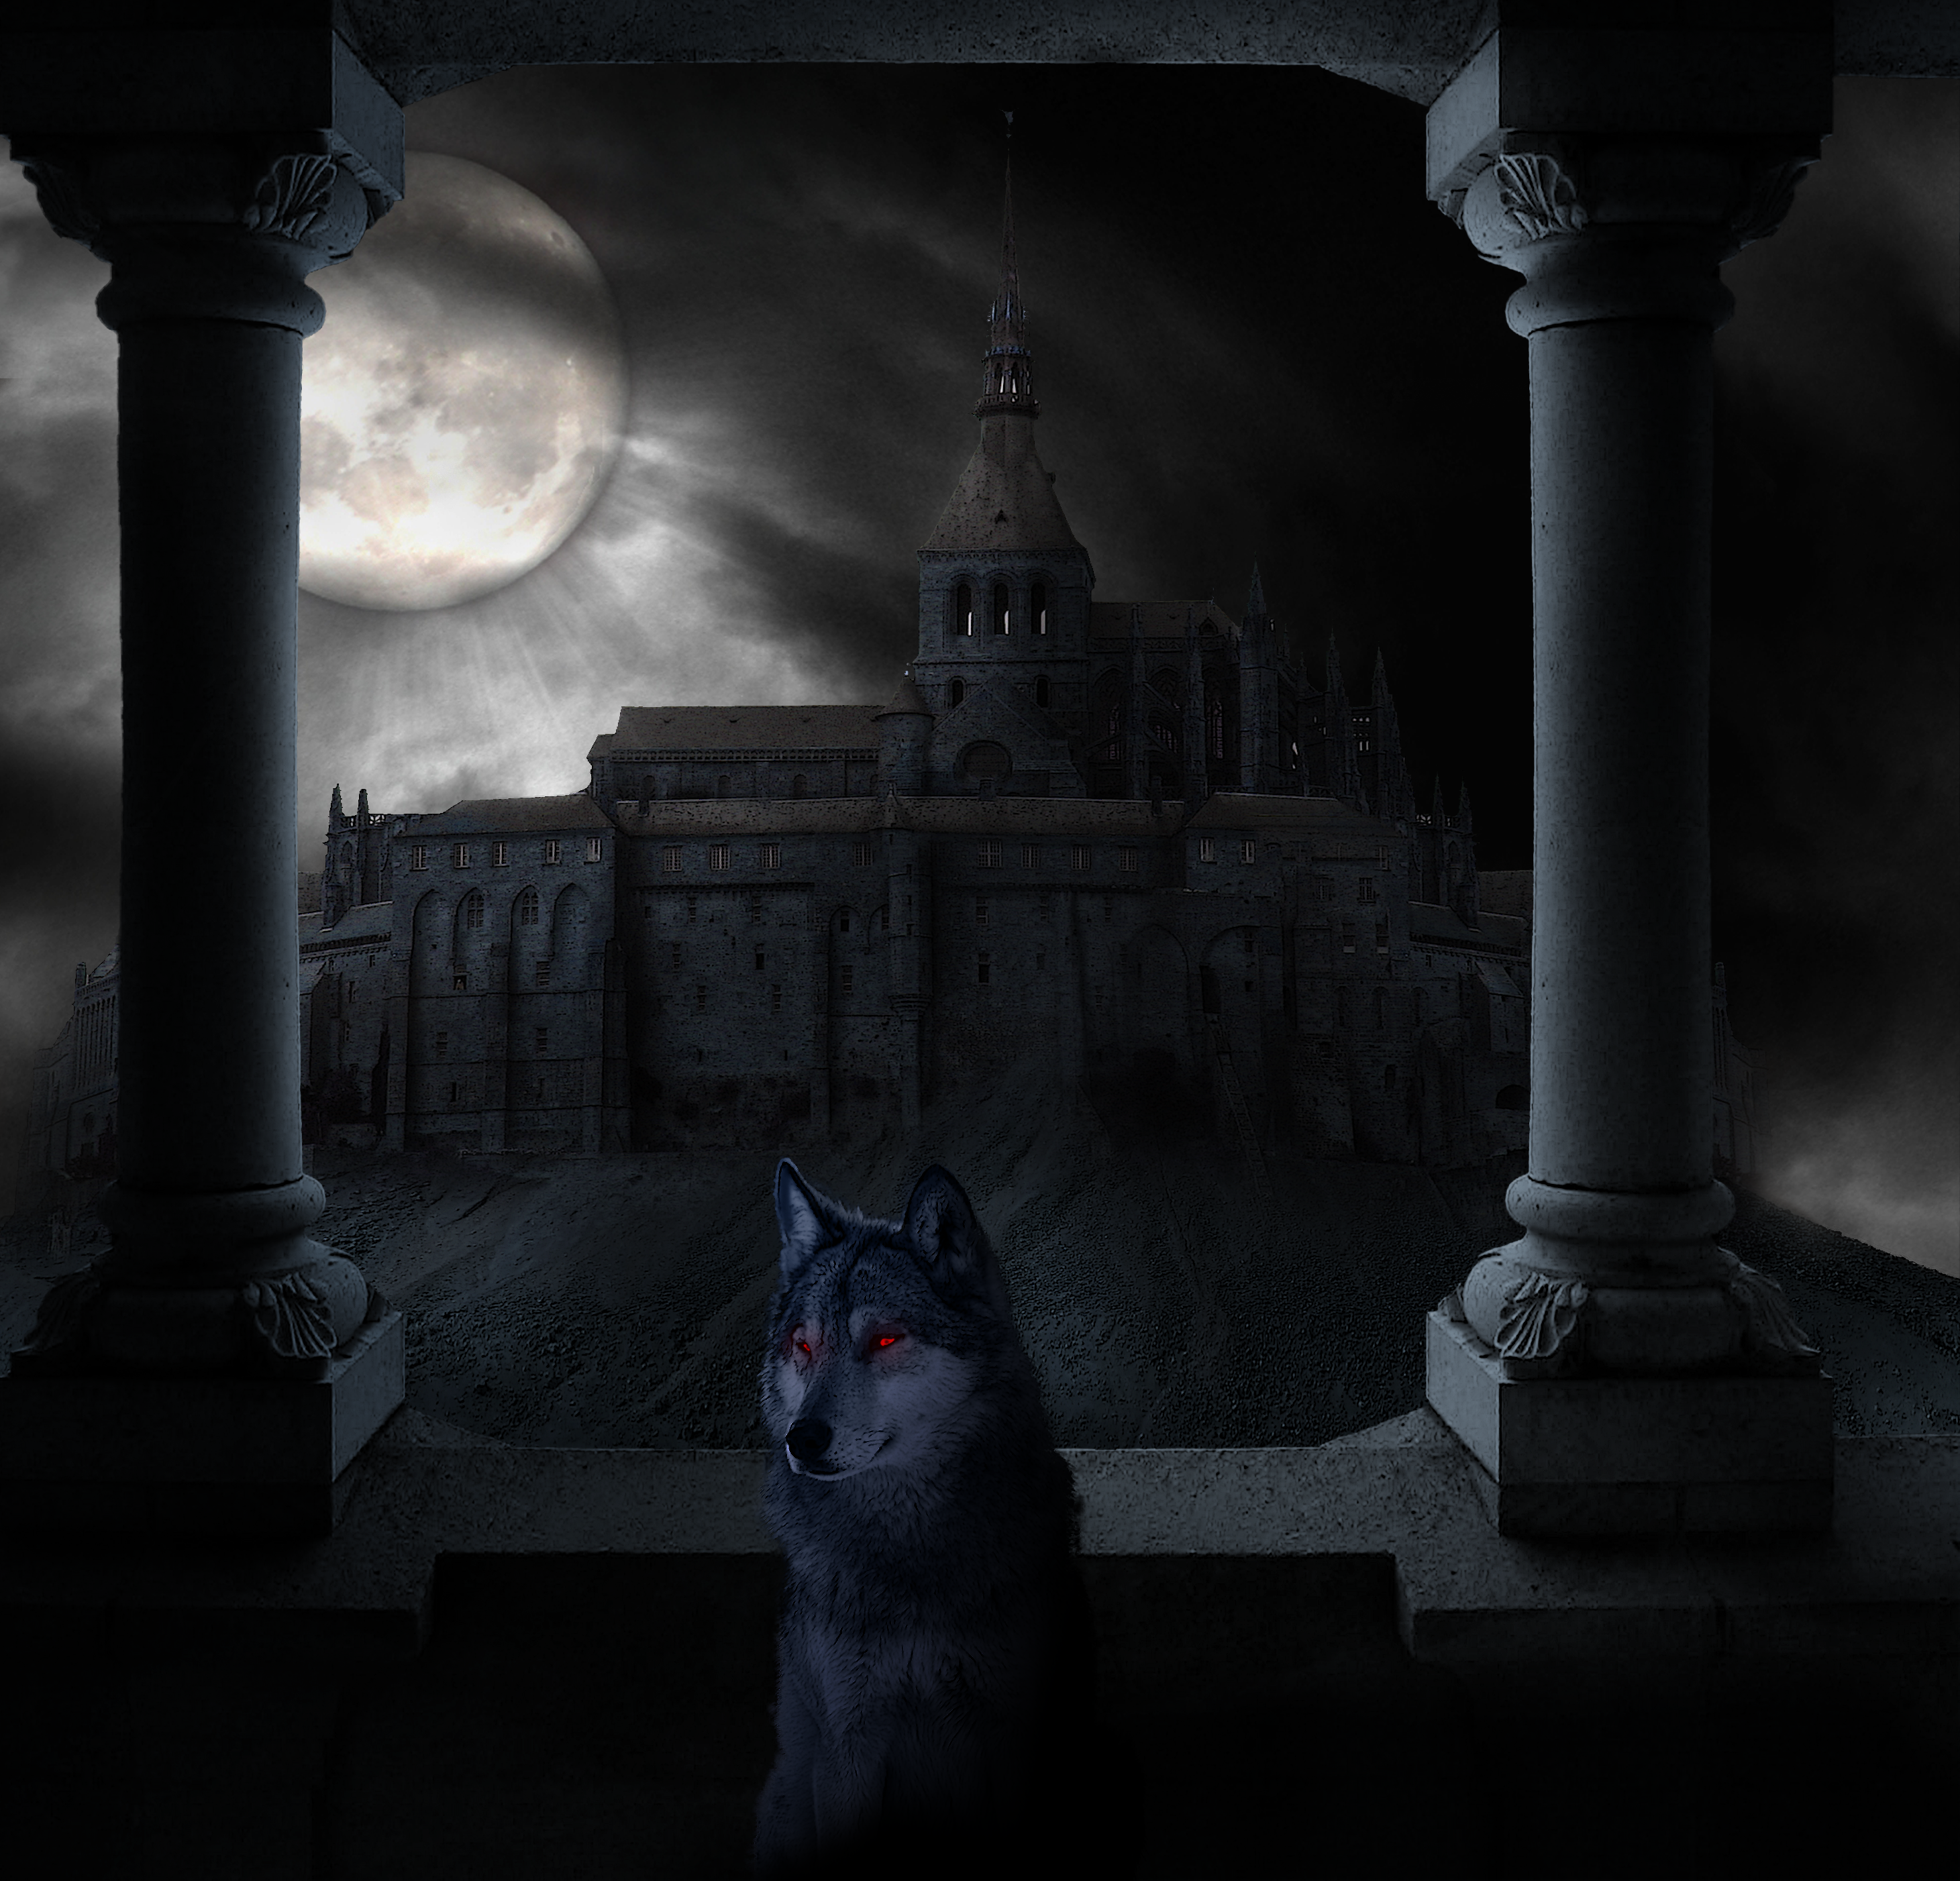 fantasy - dark_castle_by_t3rmin8tor-d35p1bw.png